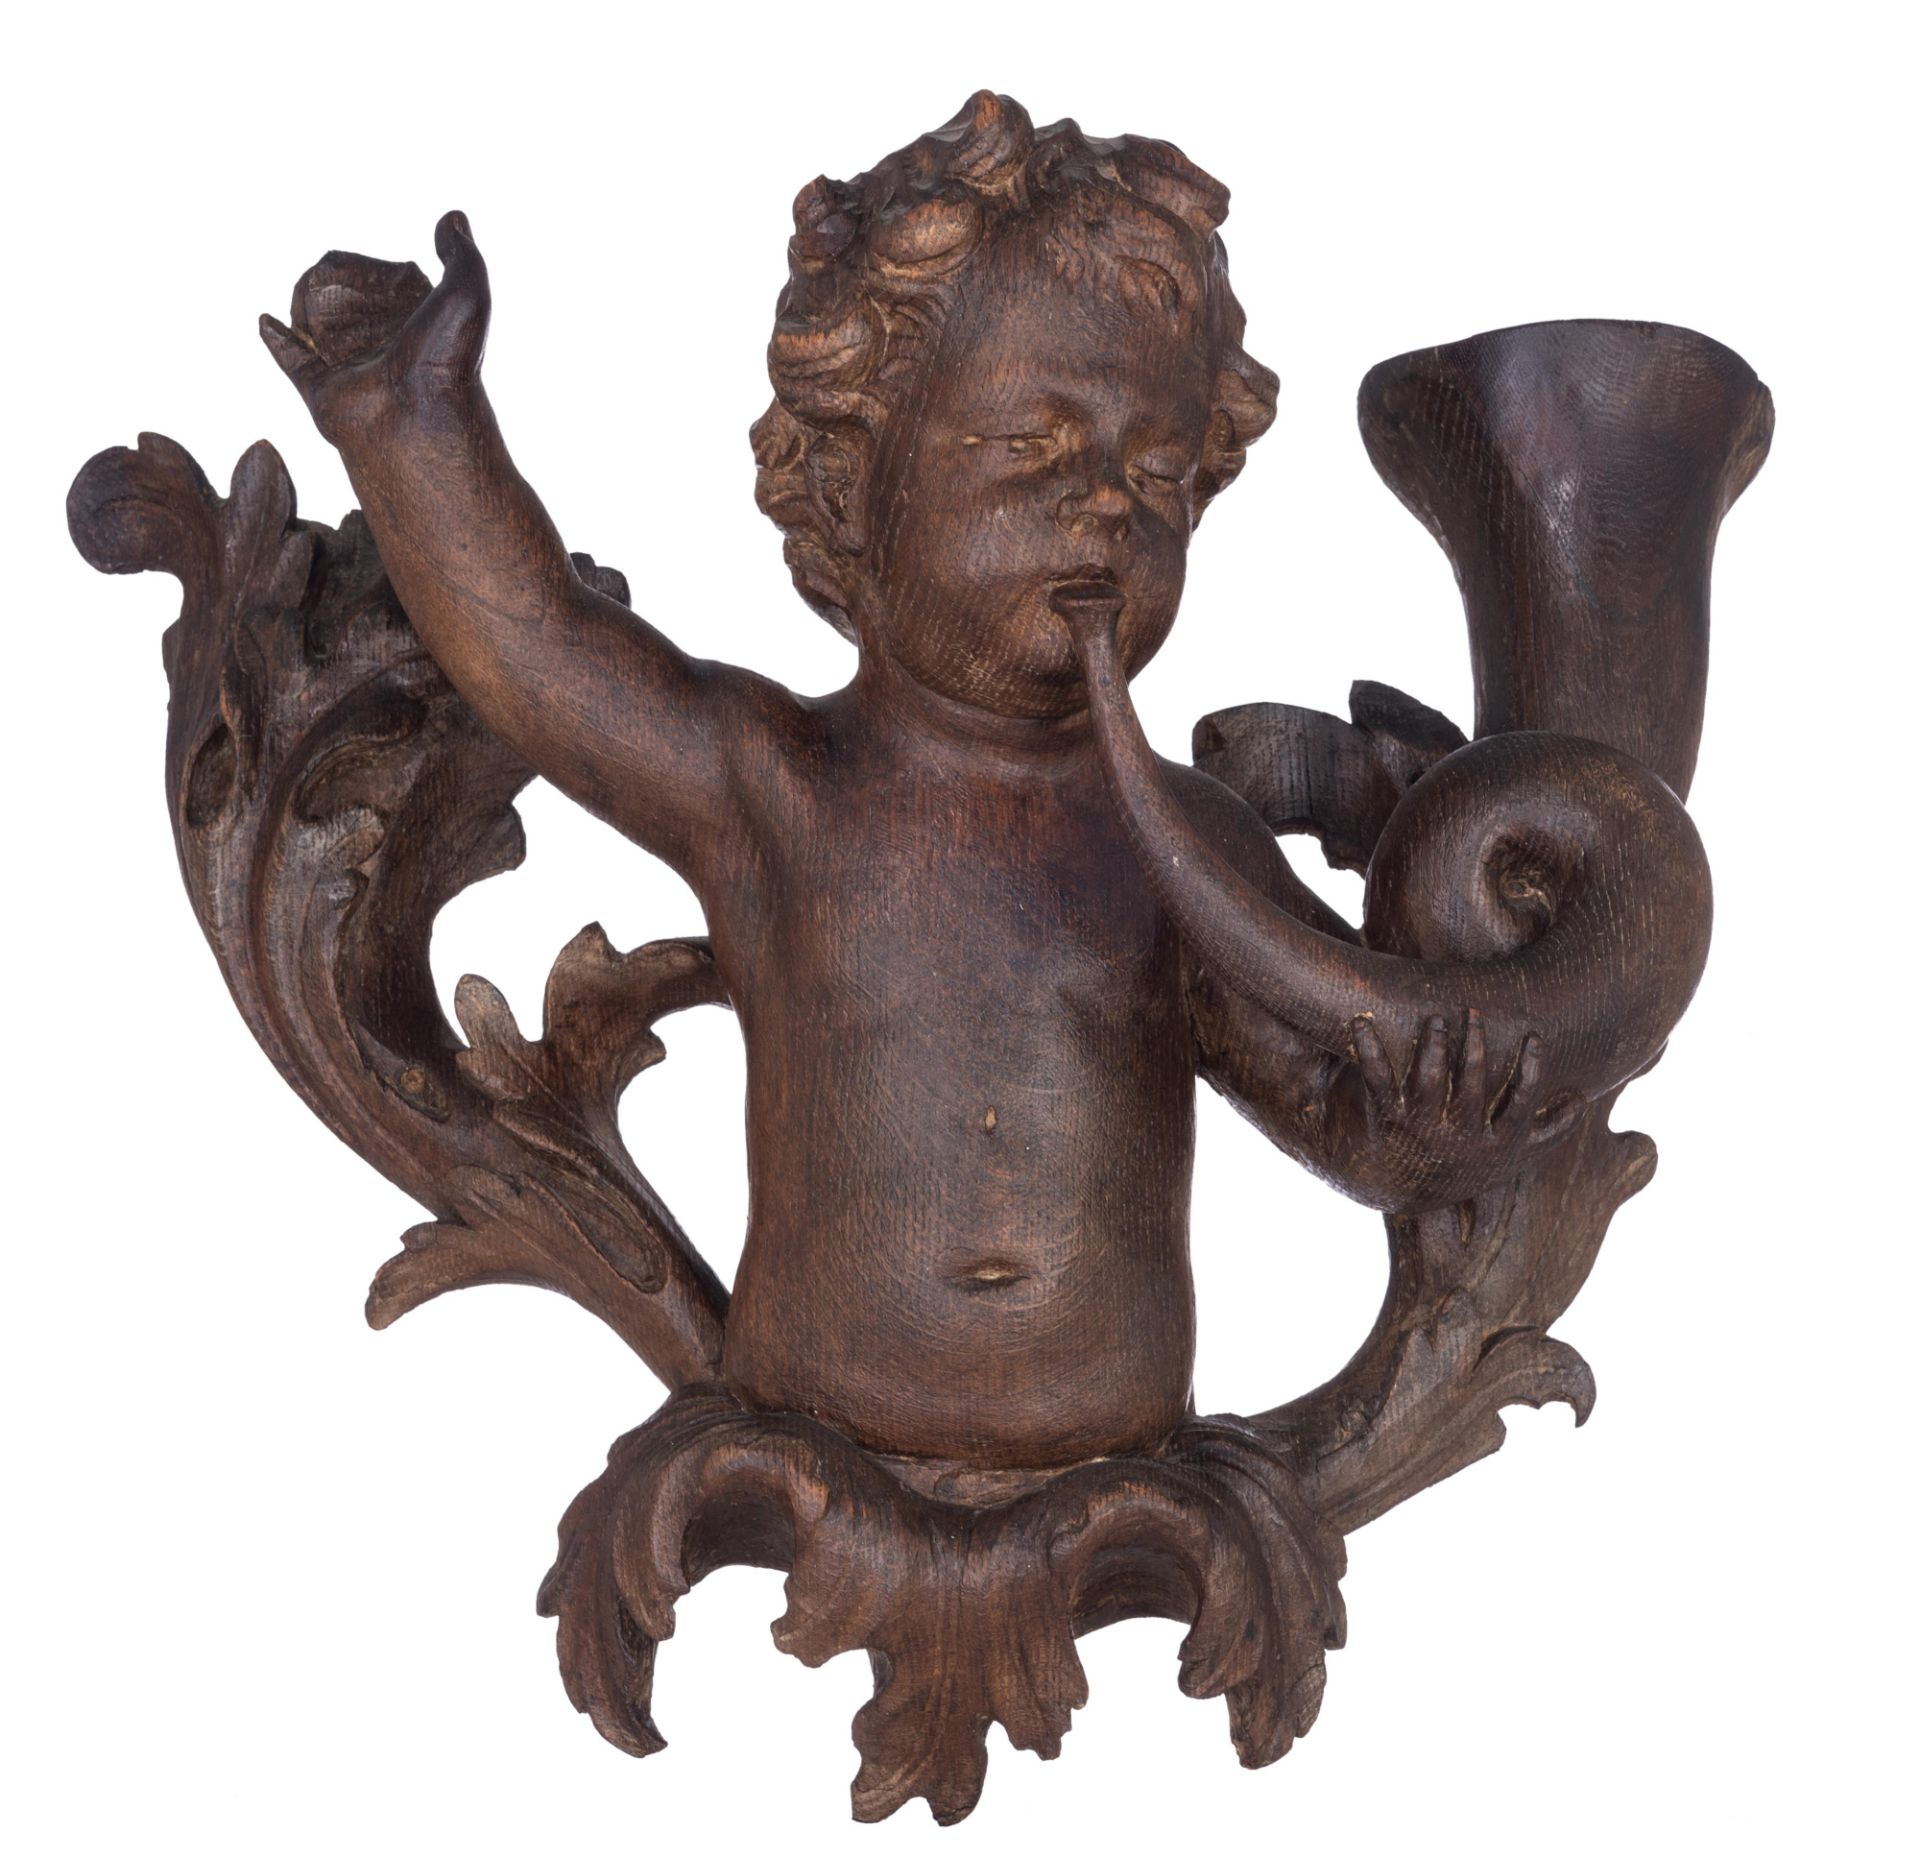 An oak angel blowing the horn of plenty, surrounded by acanthus leaves, 18thC, H 39 - W 44 cm